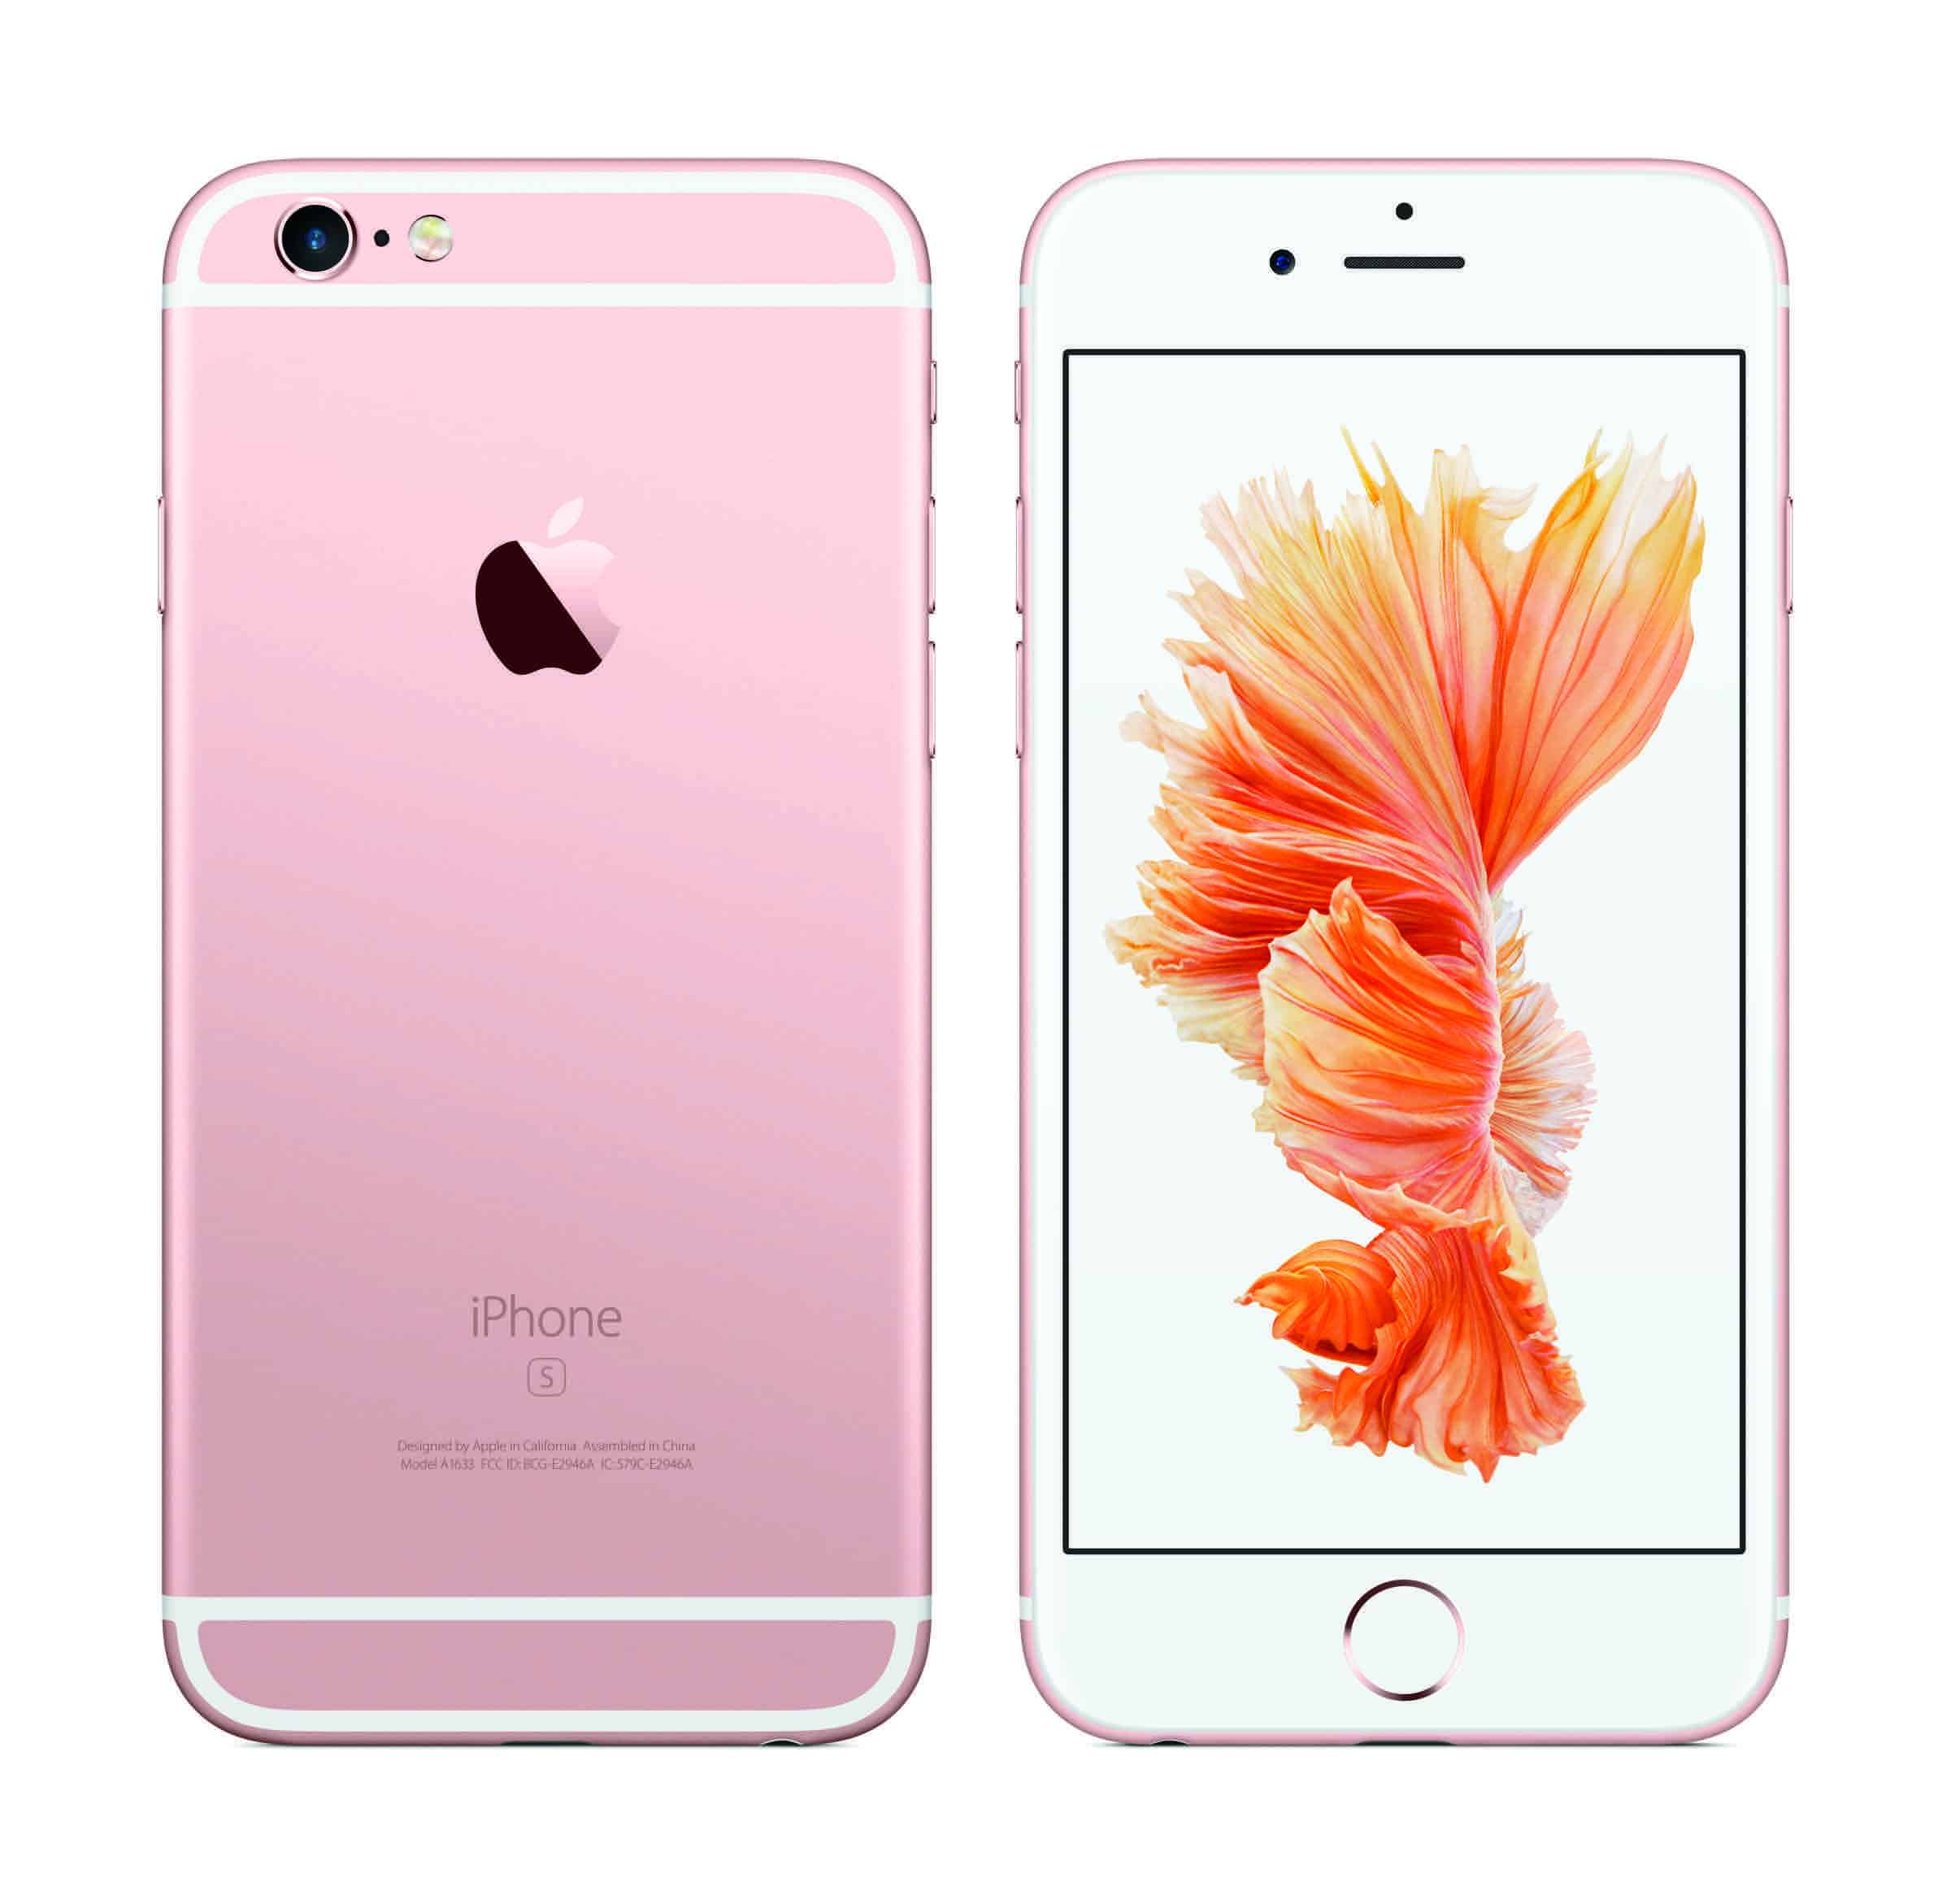 Apple iPhone 6s And iPhone 6s Plus Price, Pre